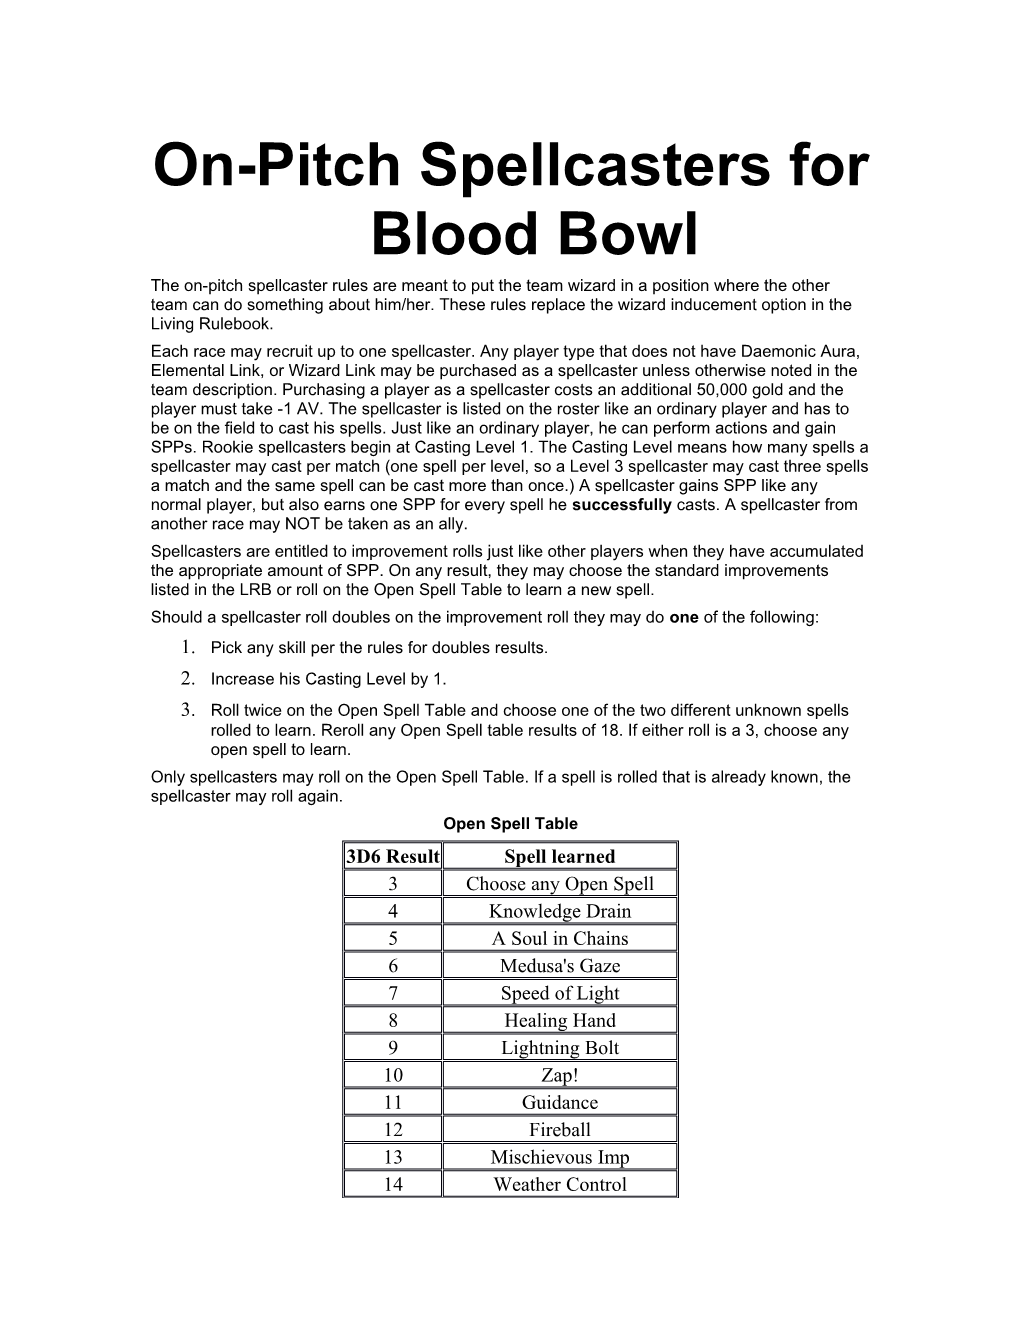 On-Pitch Spellcasters for Blood Bowl